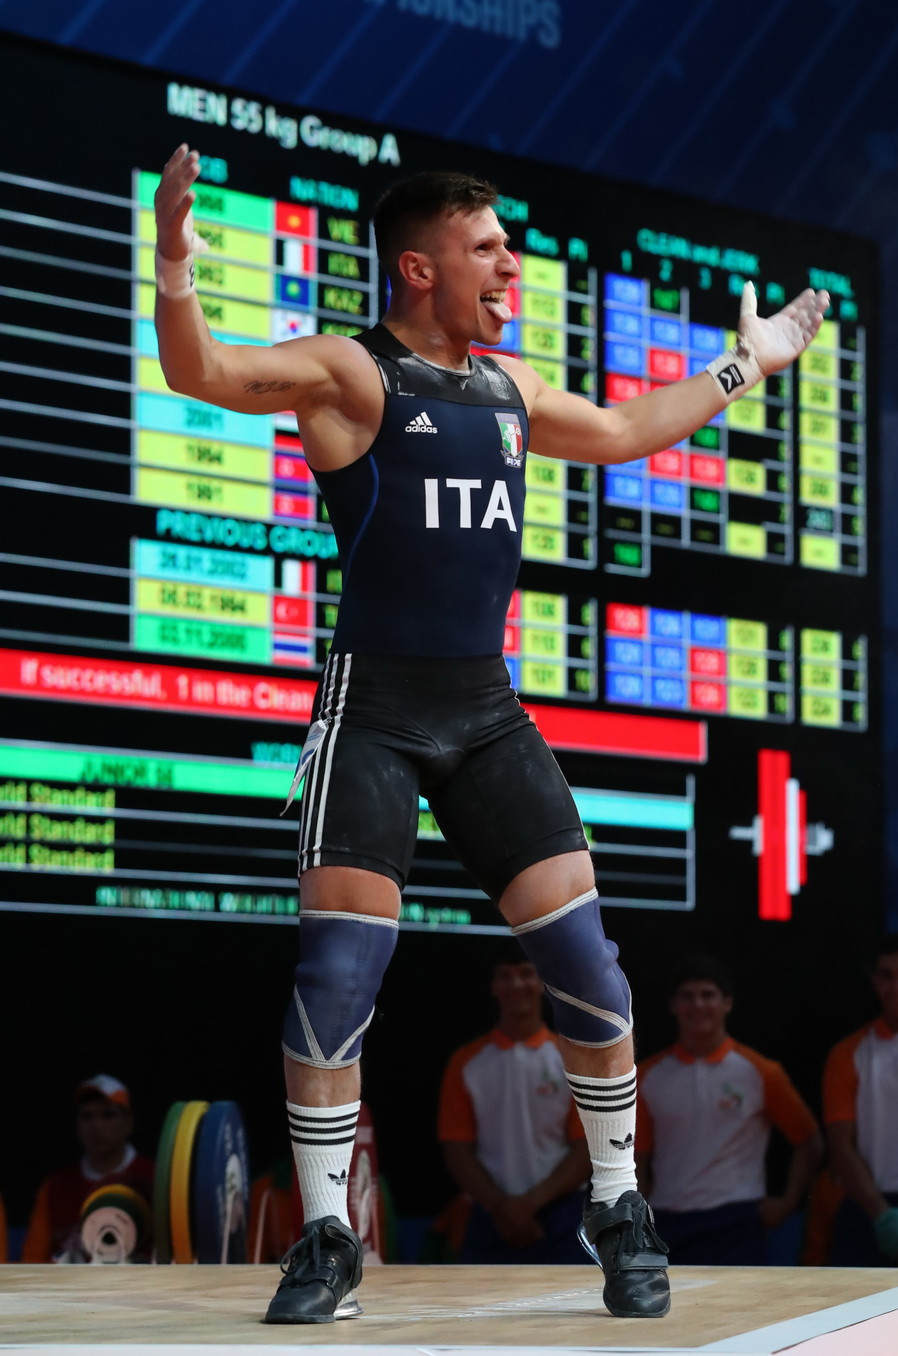 Italy’s Mirco Scarantino clinched the overall bronze medal with 252kg ©IWF